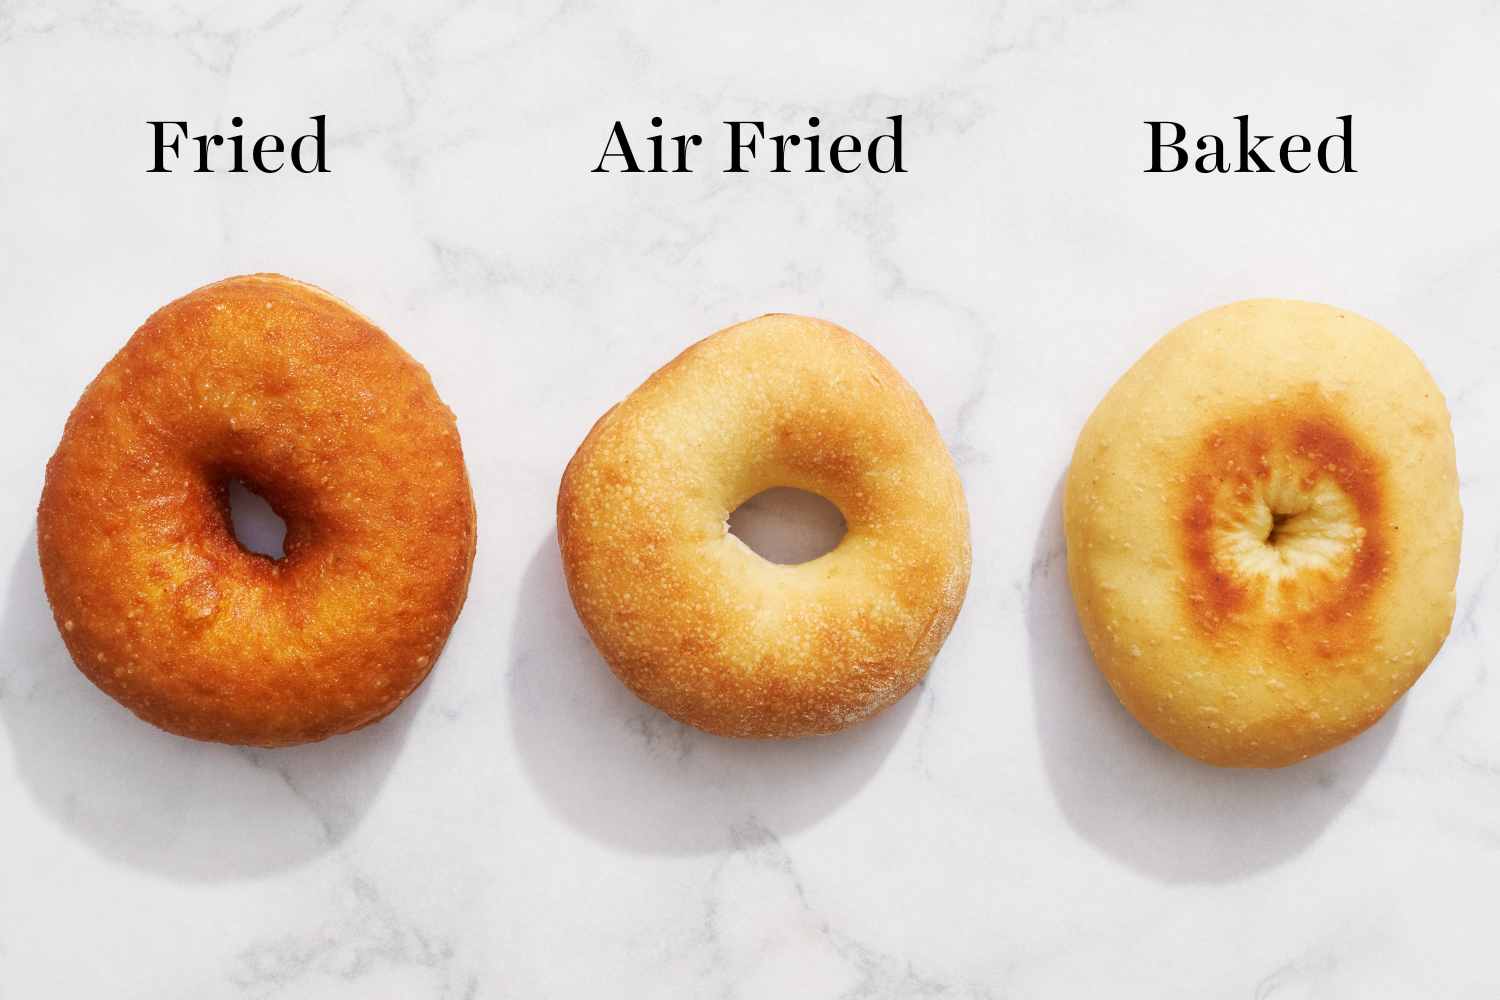 three donuts all cooked differently (fried vs. air fried vs. baked), side-by-side to compare.